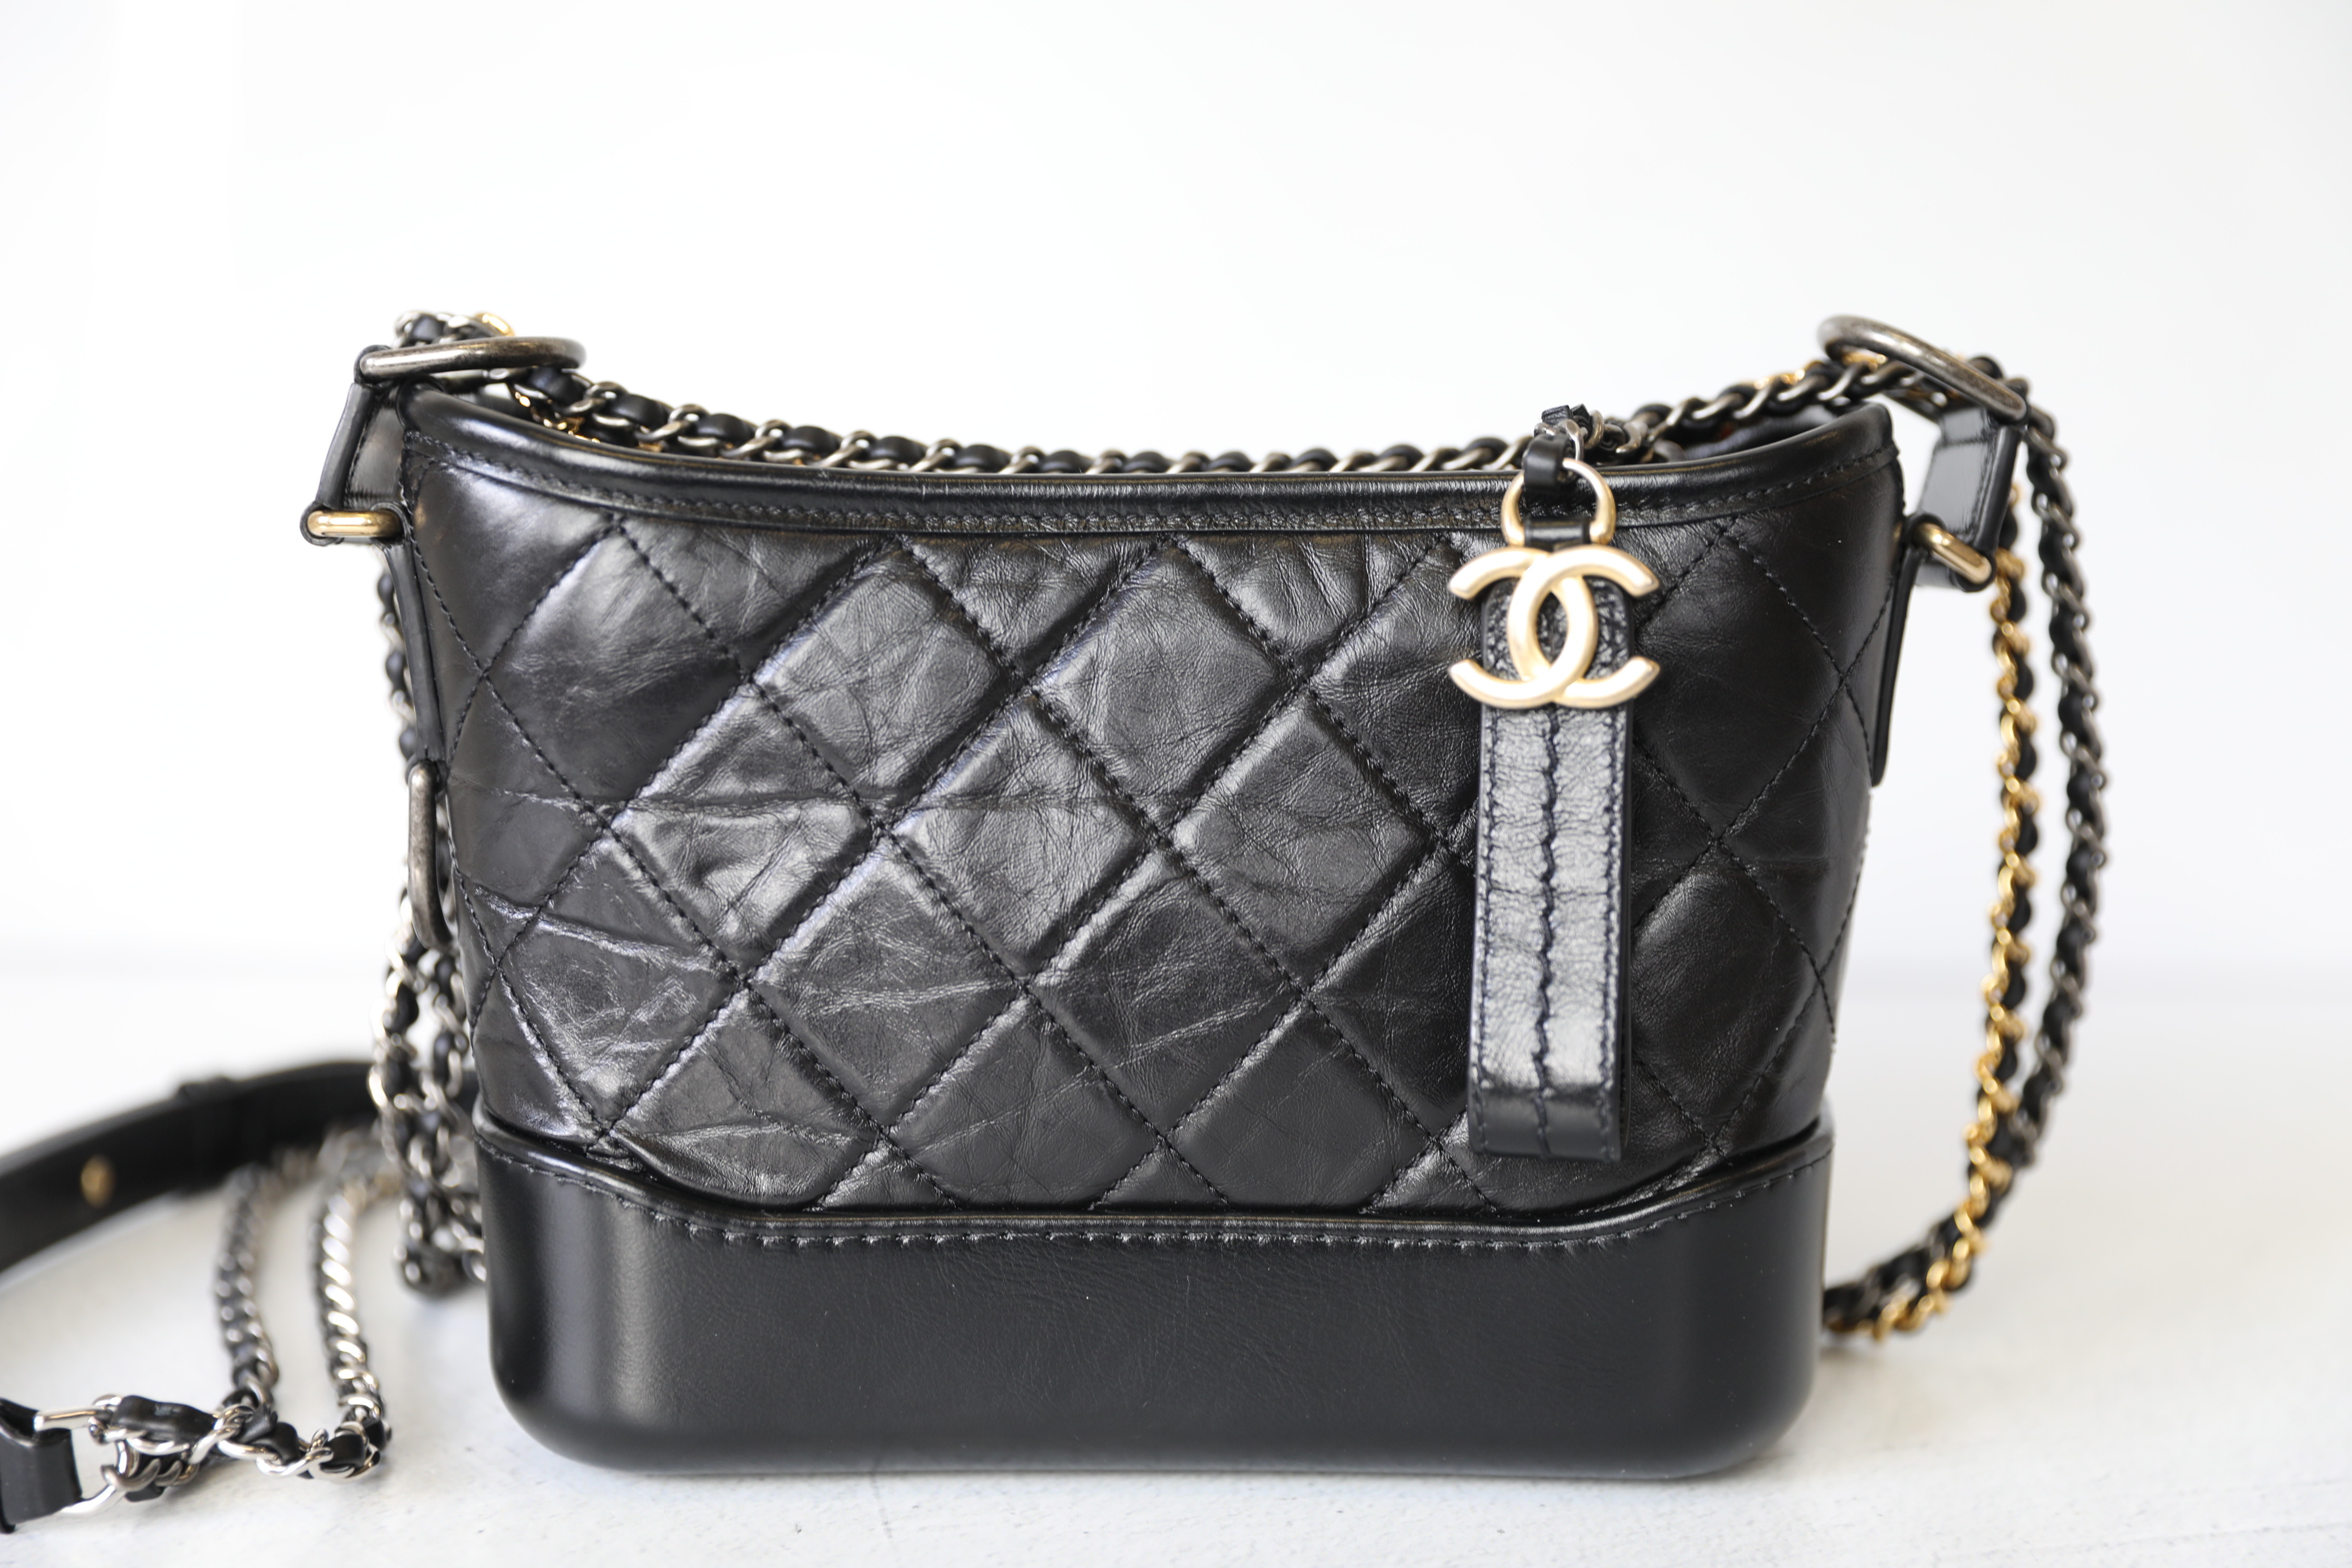 CHANEL, Bags, Chanel Aged Calfskin Quilted Small Gabrielle Hobo Black